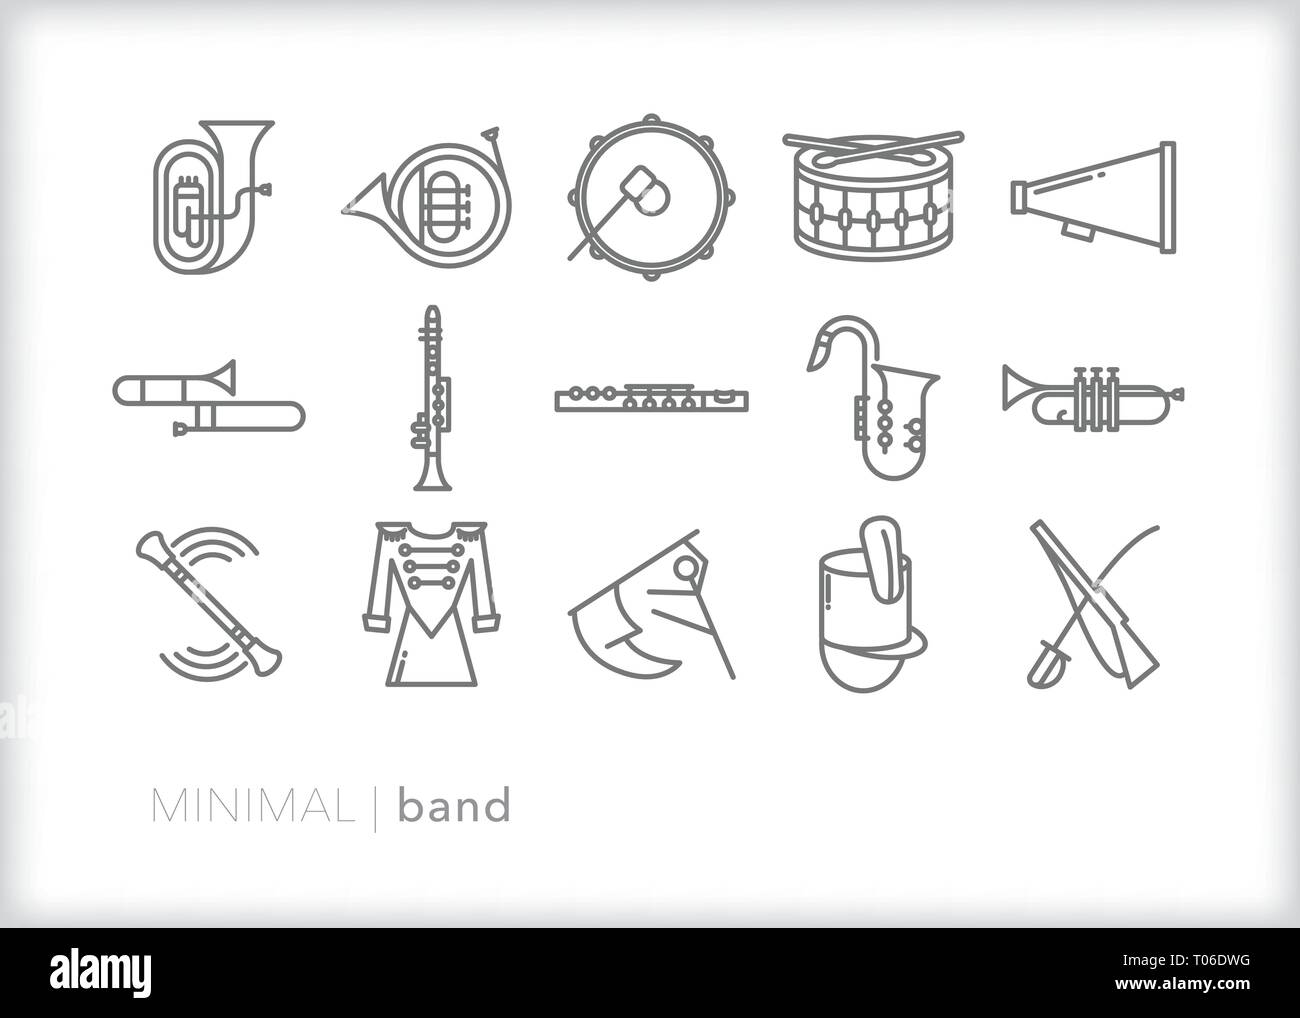 Set of 15 marching band or band class line icons of wind, reed and percussion instruments as well as color guard flag, rifle and baton Stock Vector